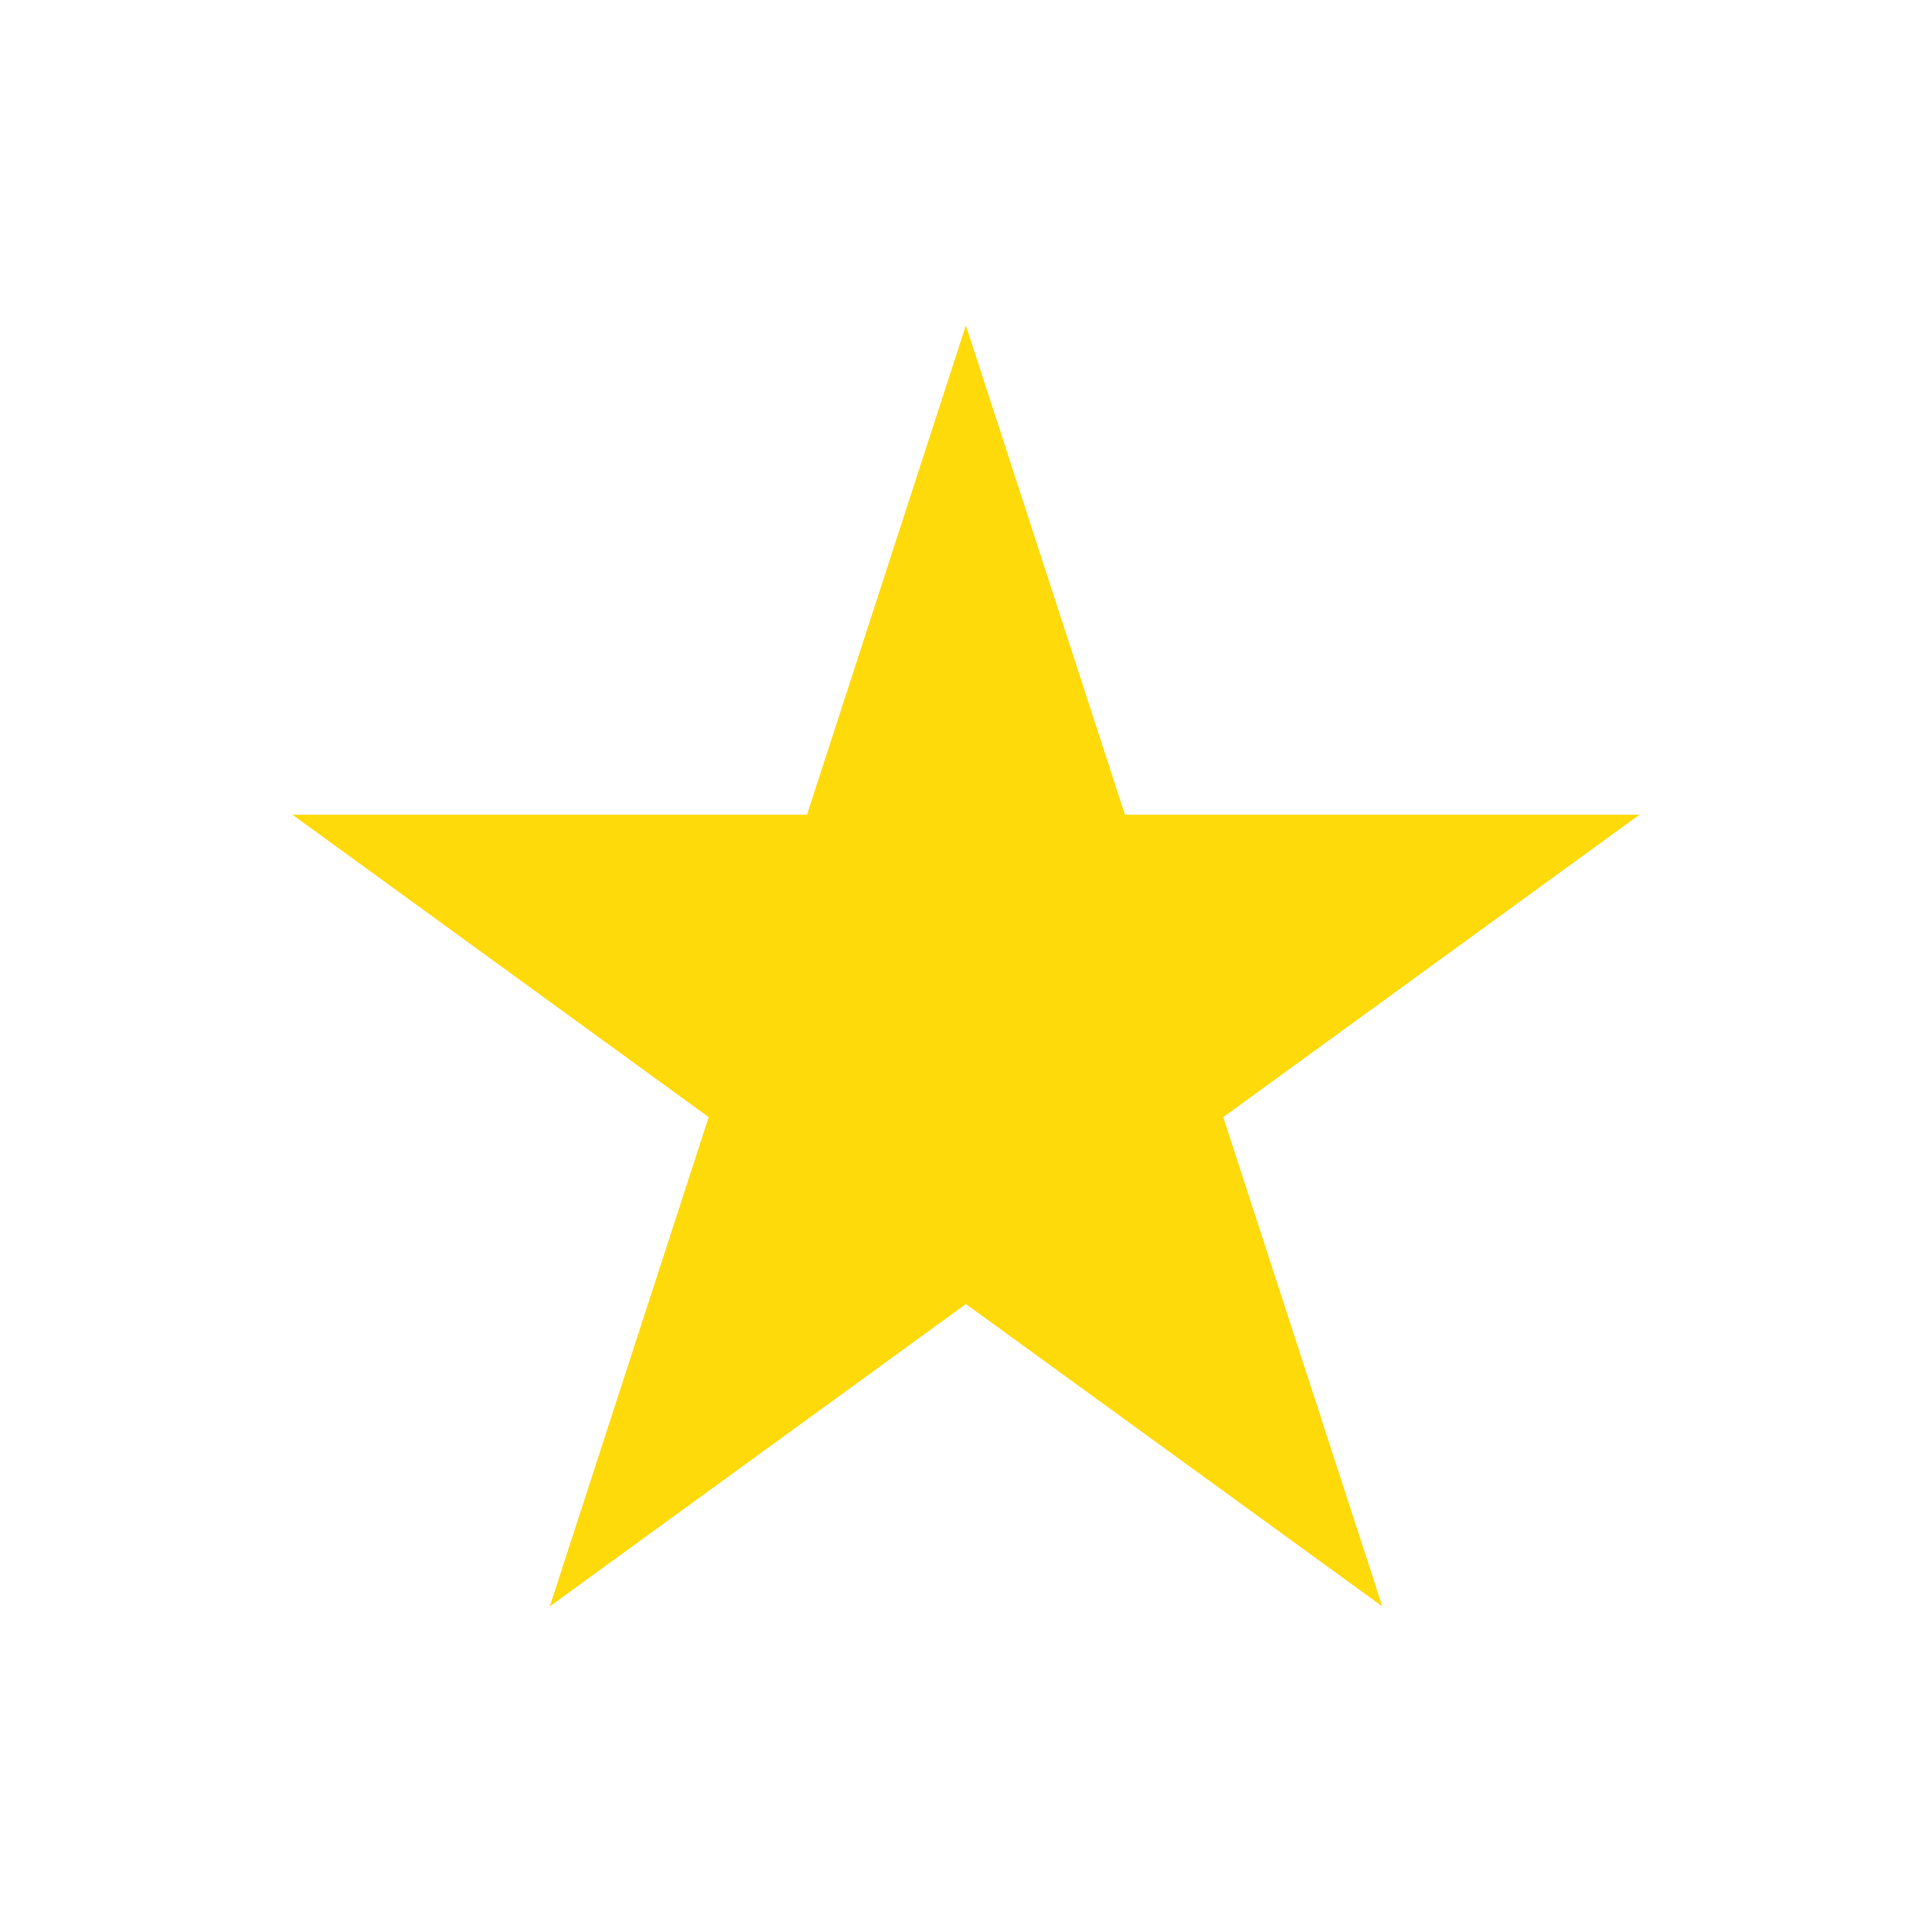 yellow star for review rating